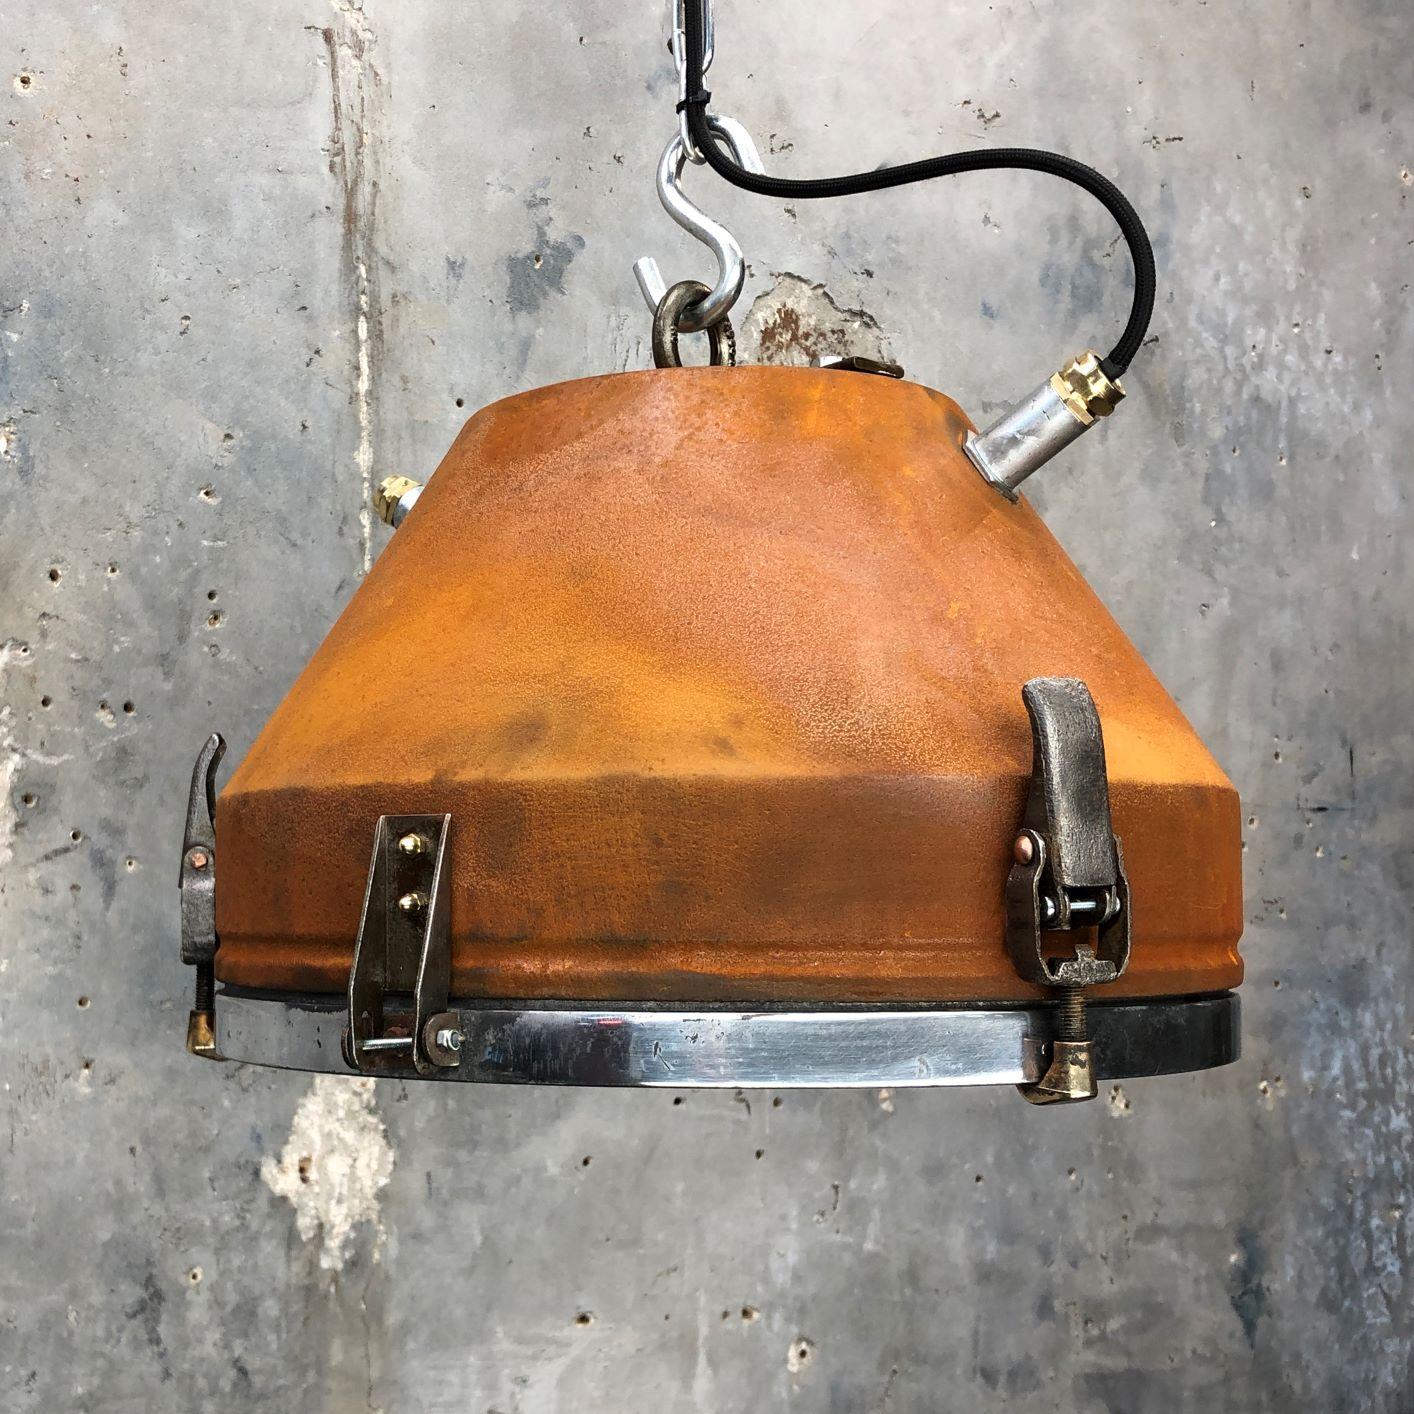 A mid century industrial rusty iron & aluminum ceiling pendant with glass cover by VEB of Germany with rust applique finish.

Professionally restored by hand in the UK to modern lighting standards for use in contemporary interiors. Originally